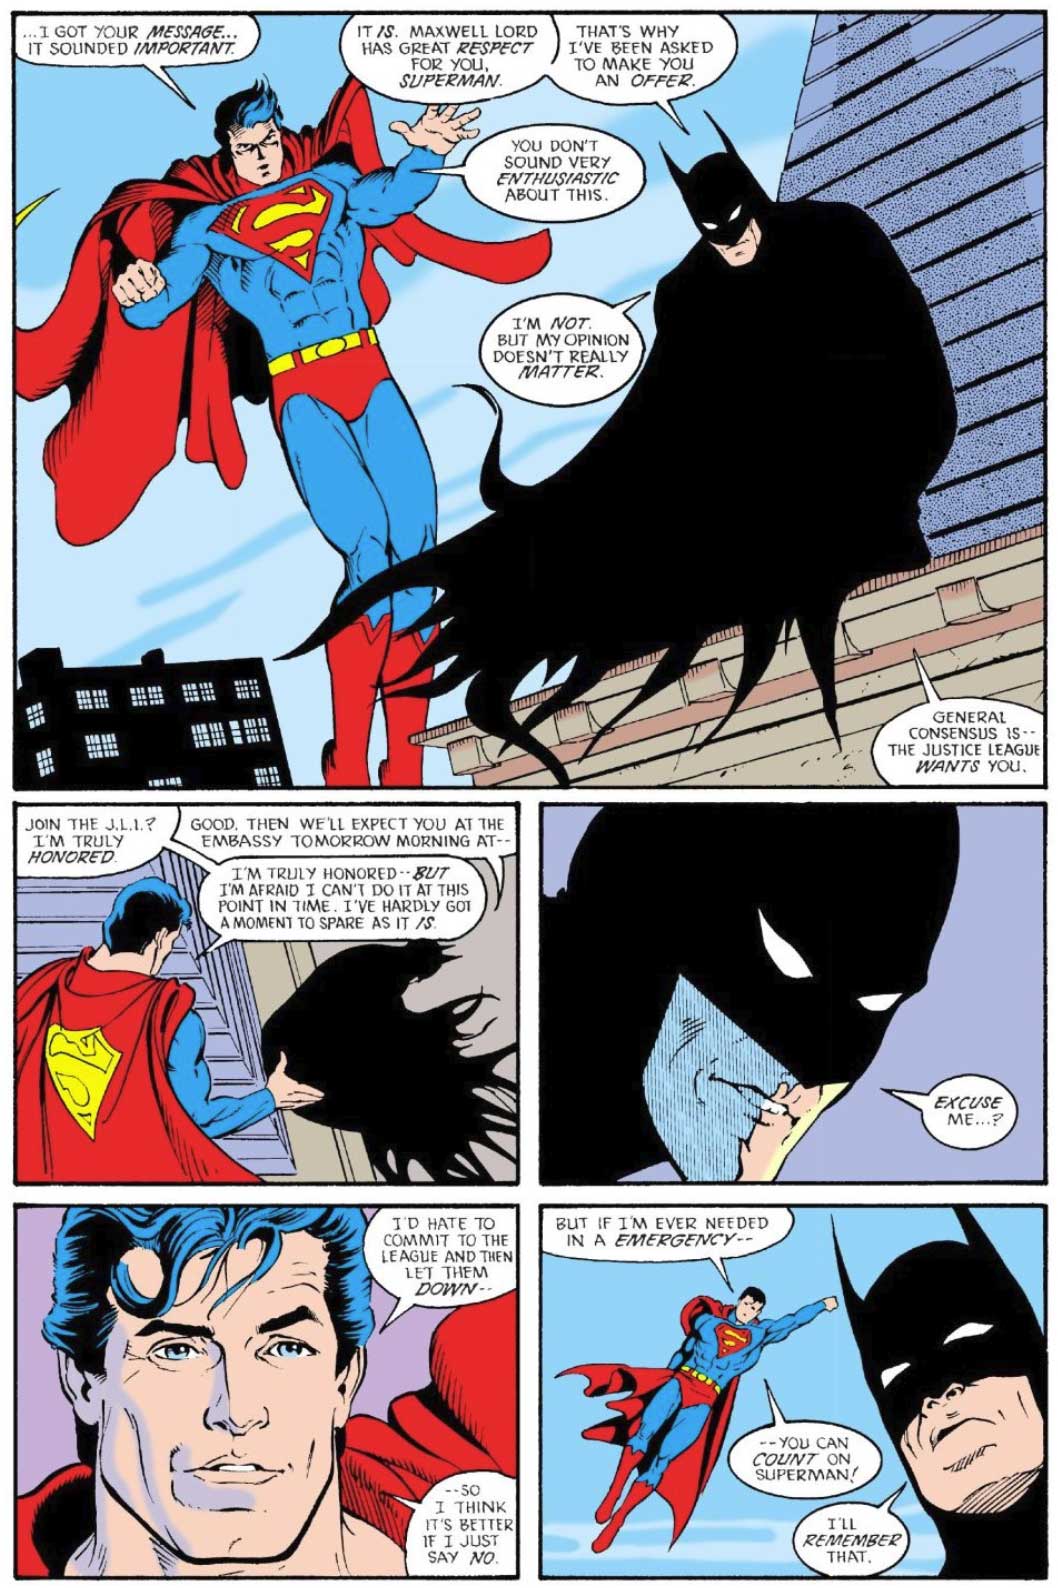 Justice League International #19 by Keith Giffen, JM DeMatteis, Kevin Maguire, and Joe Rubinstein